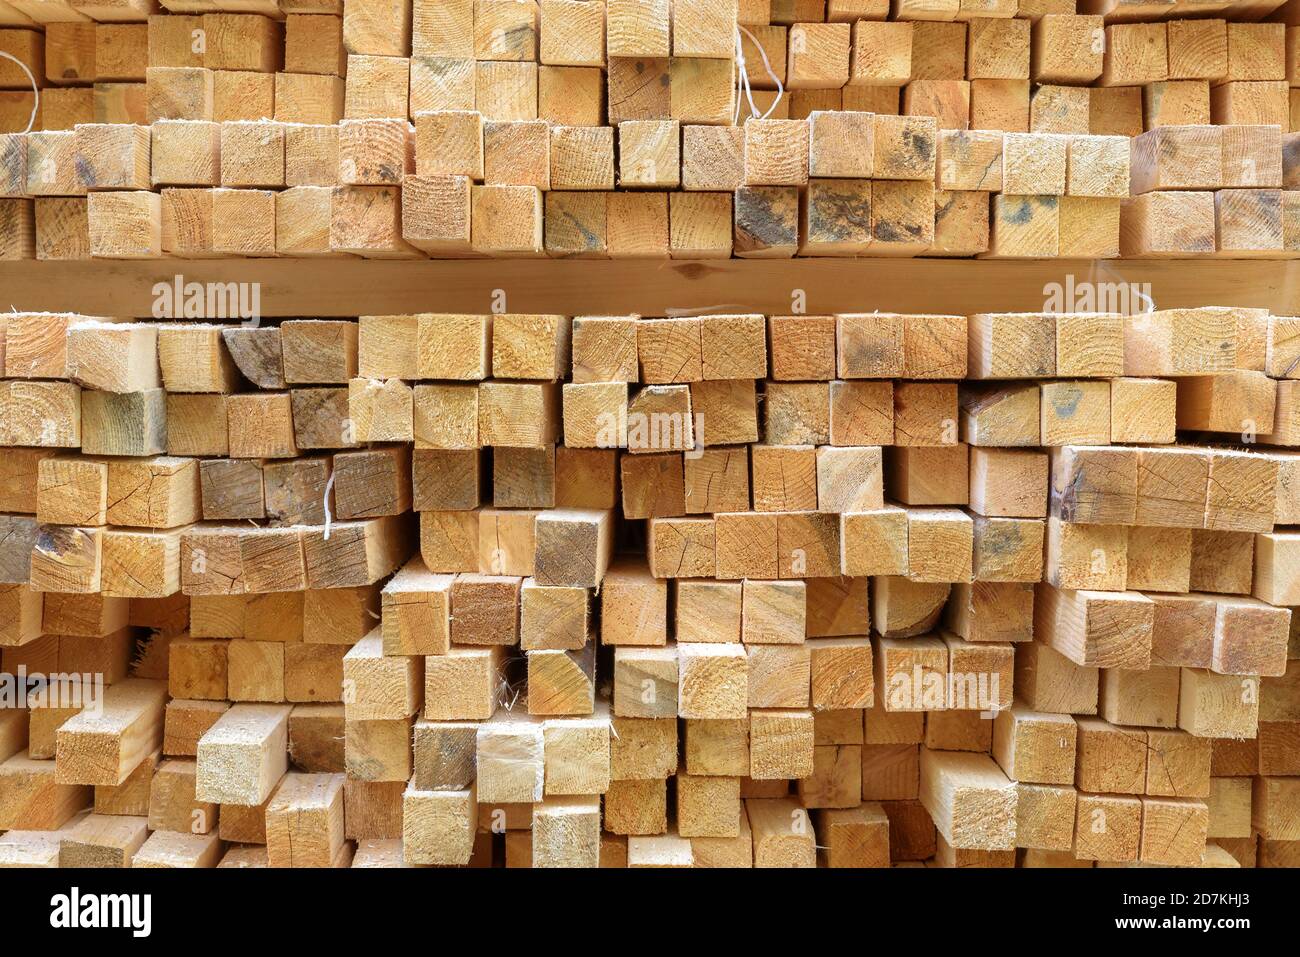 Lumber in sawmill, ends of timber blocks for texture background. Sawed and processed wood in storage, timber stack in factory yard. Pile of wooden boa Stock Photo